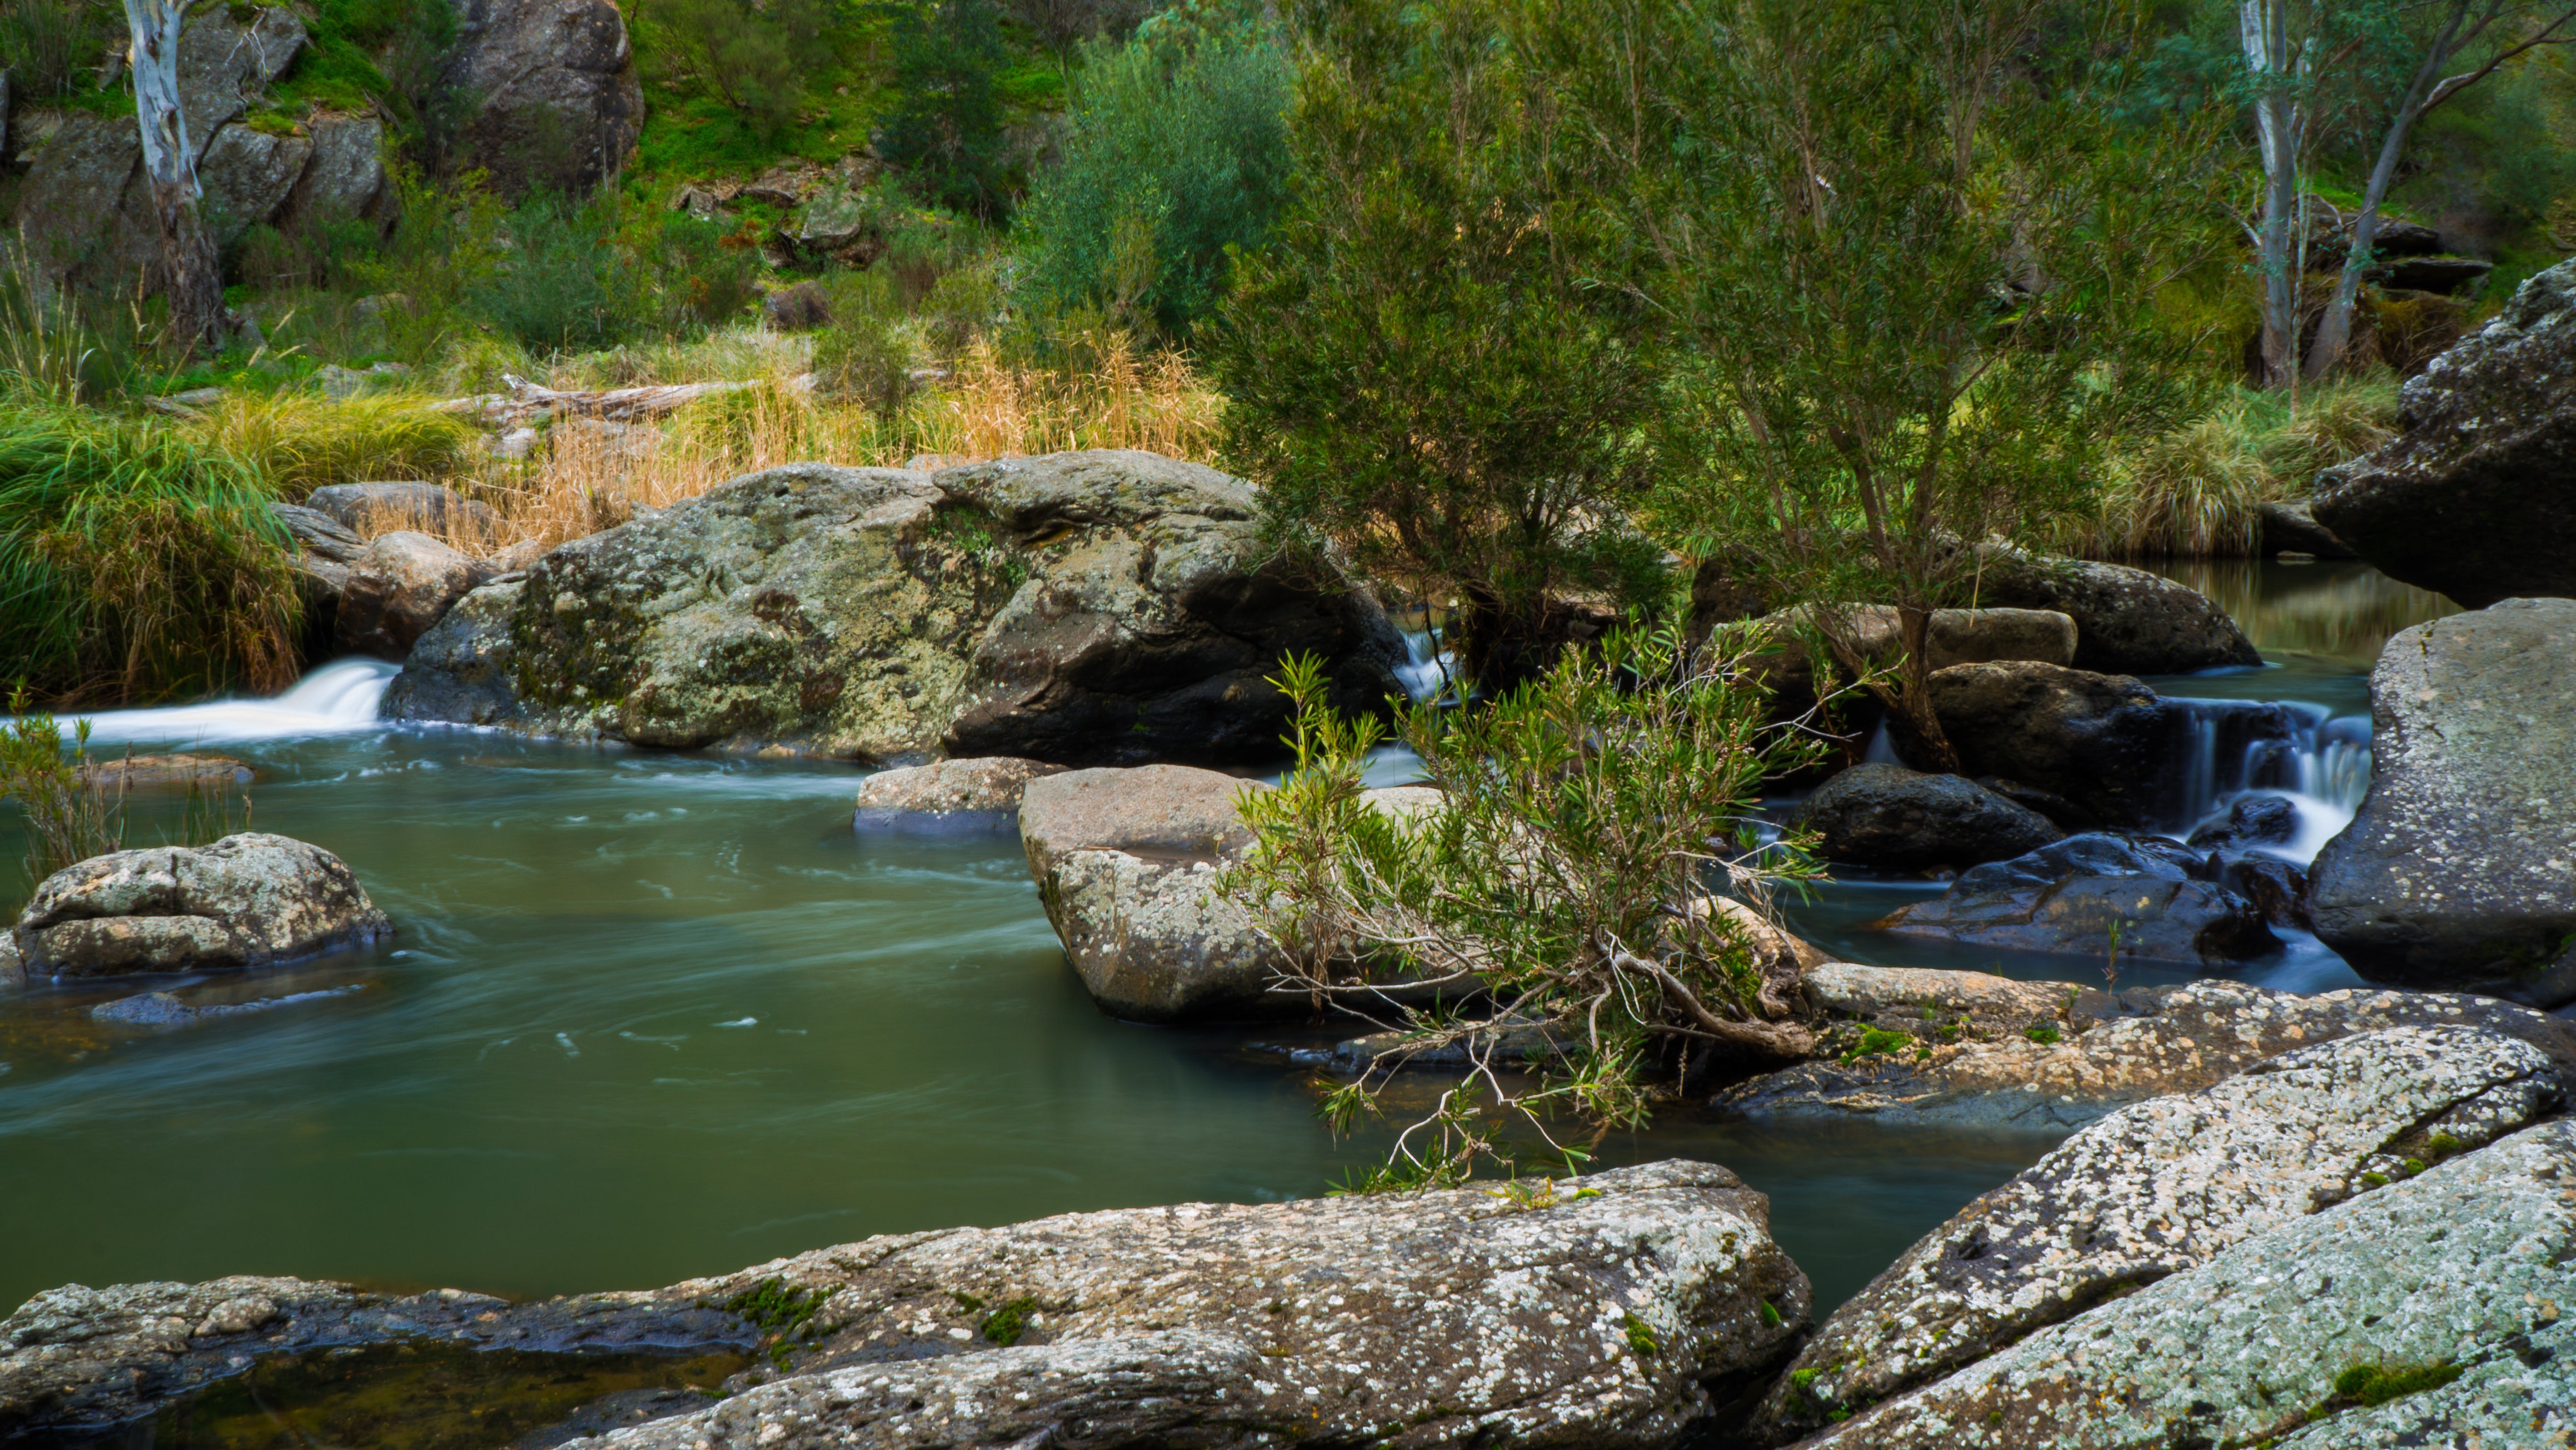 Onkaparinga River National Park - Attractions